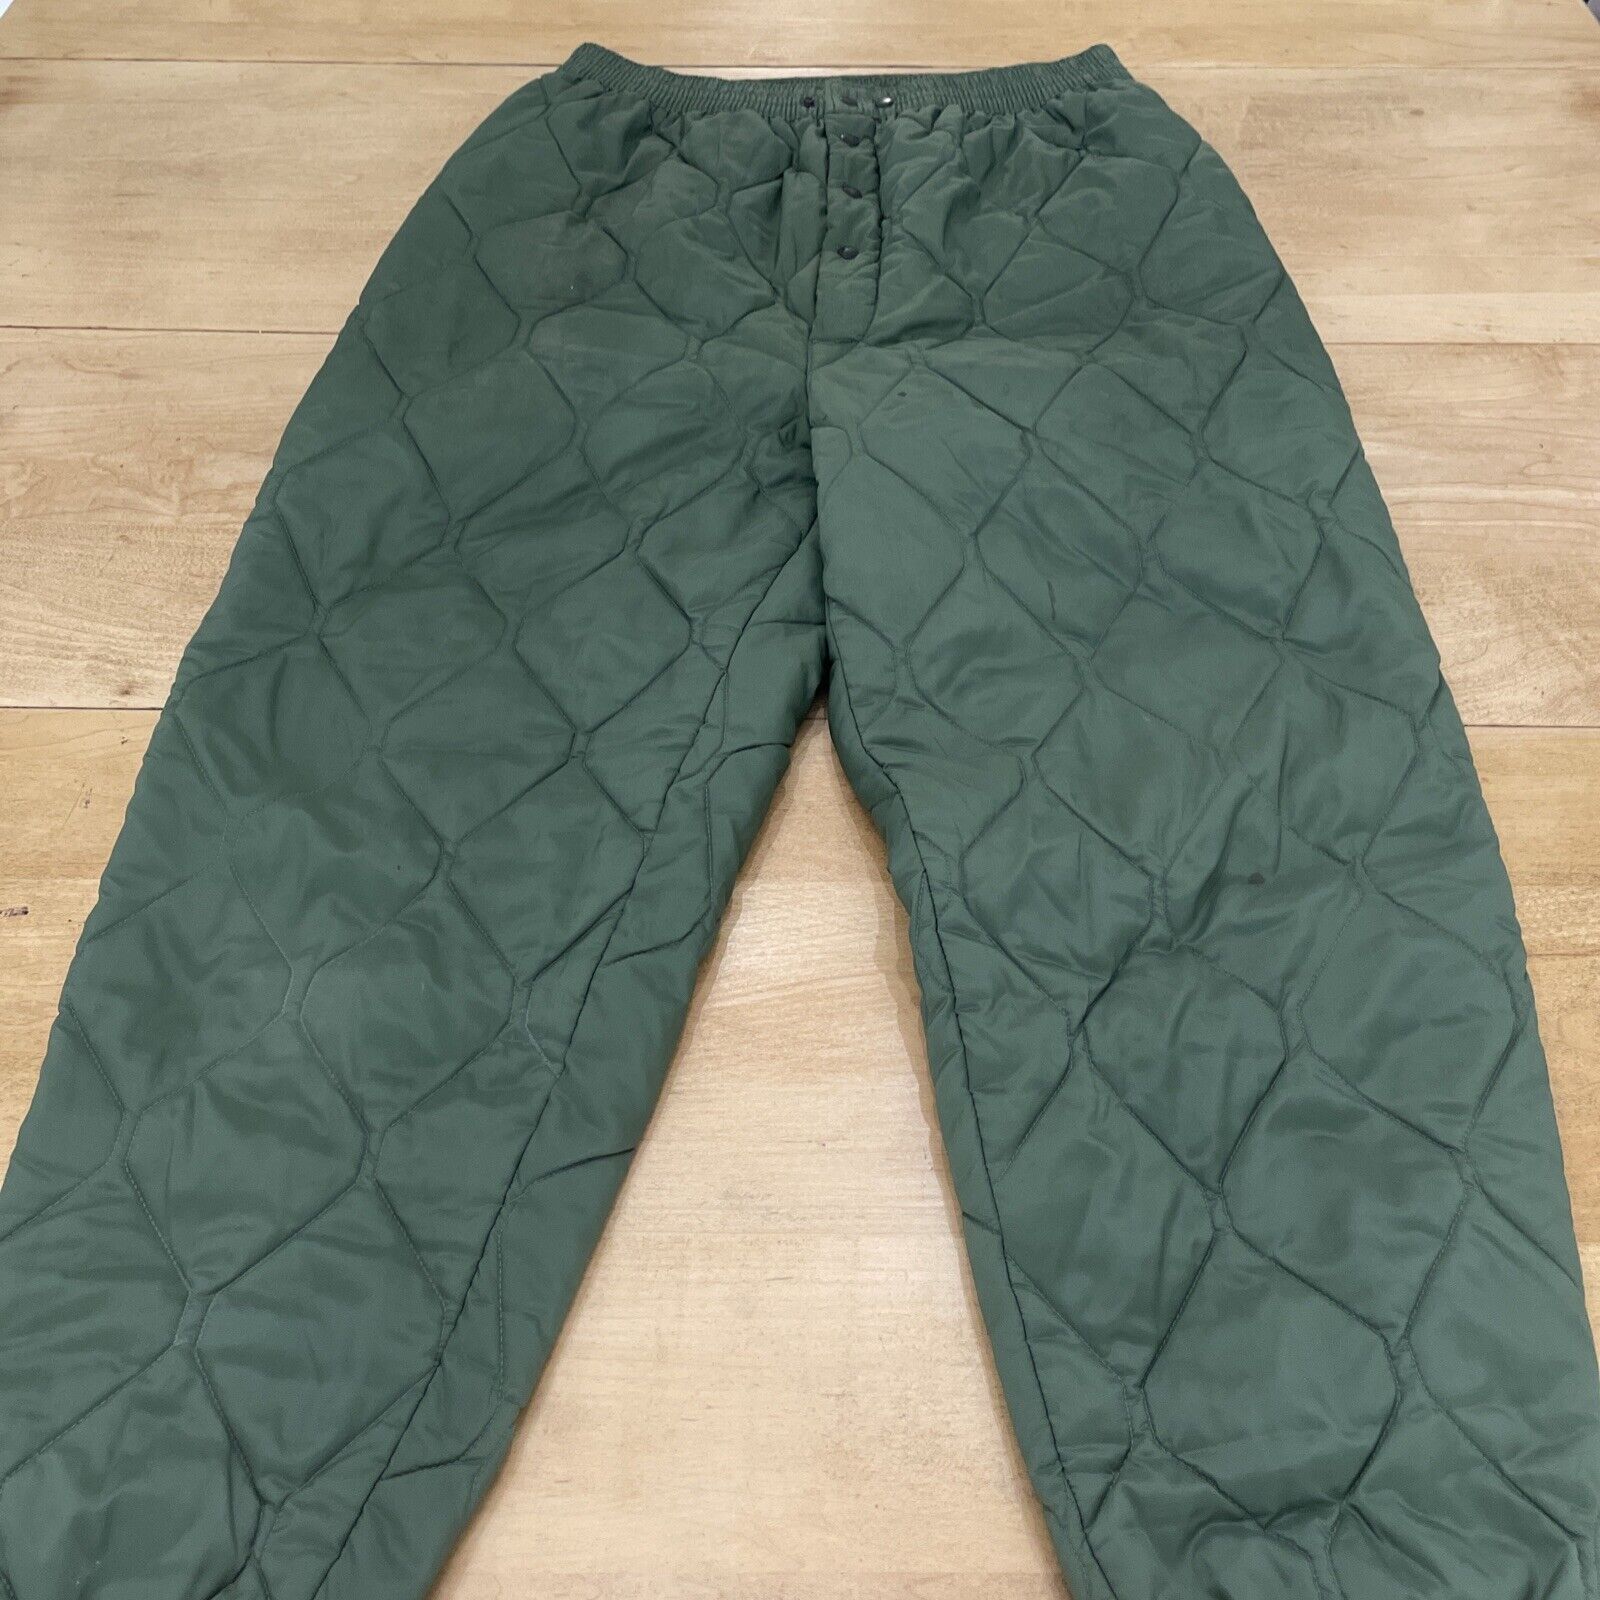 USAF Size Large Quilted Liner Flyers Trousers Green Insulated CWU-9/P